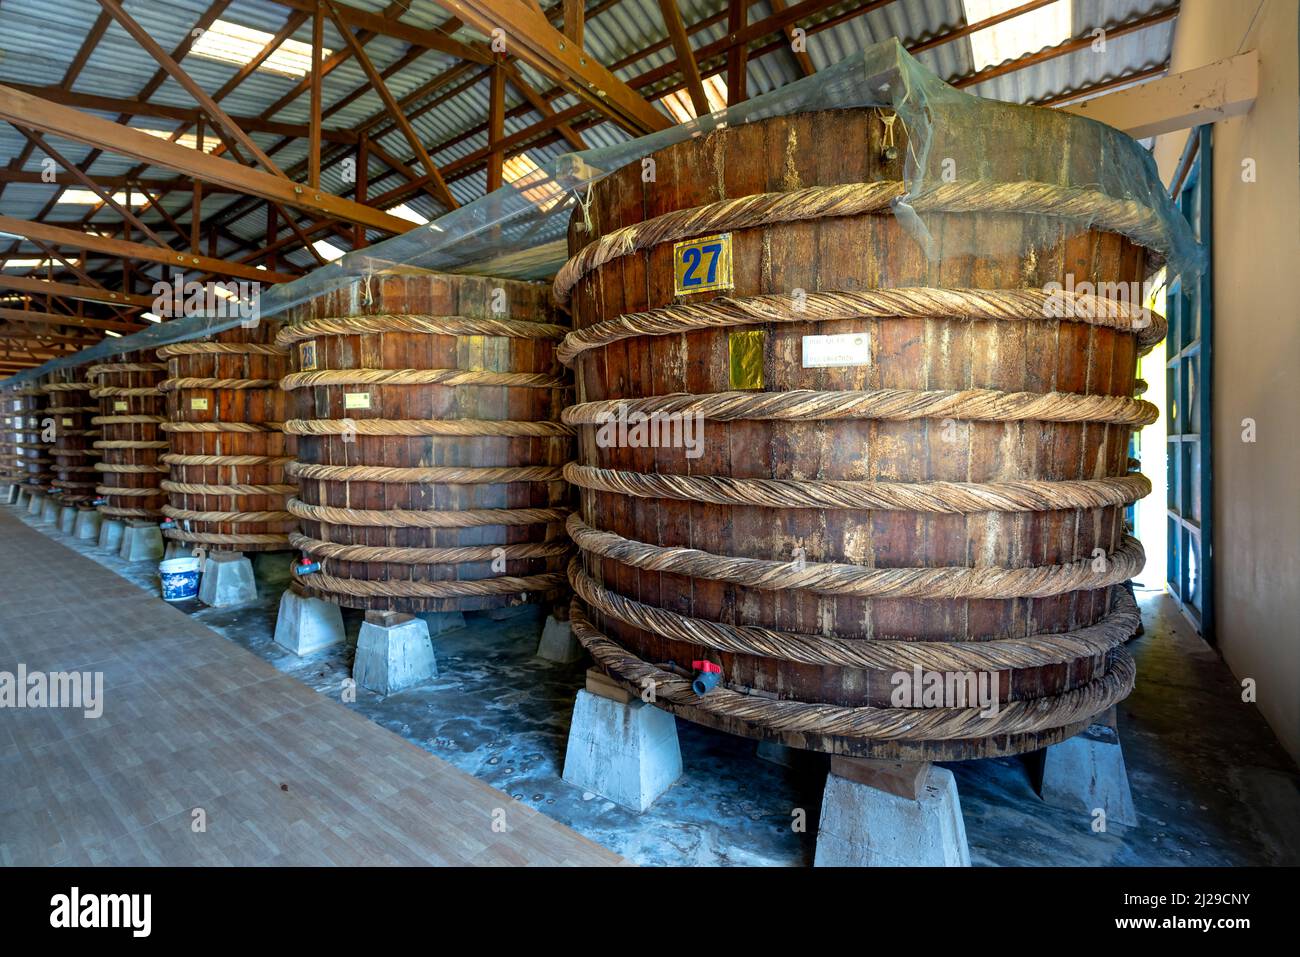 Phu Quoc Island, Vietnam - February 24, 2022: At the fish sauce production facility, the factory on Phu Quoc island follows the traditional fermentati Stock Photo